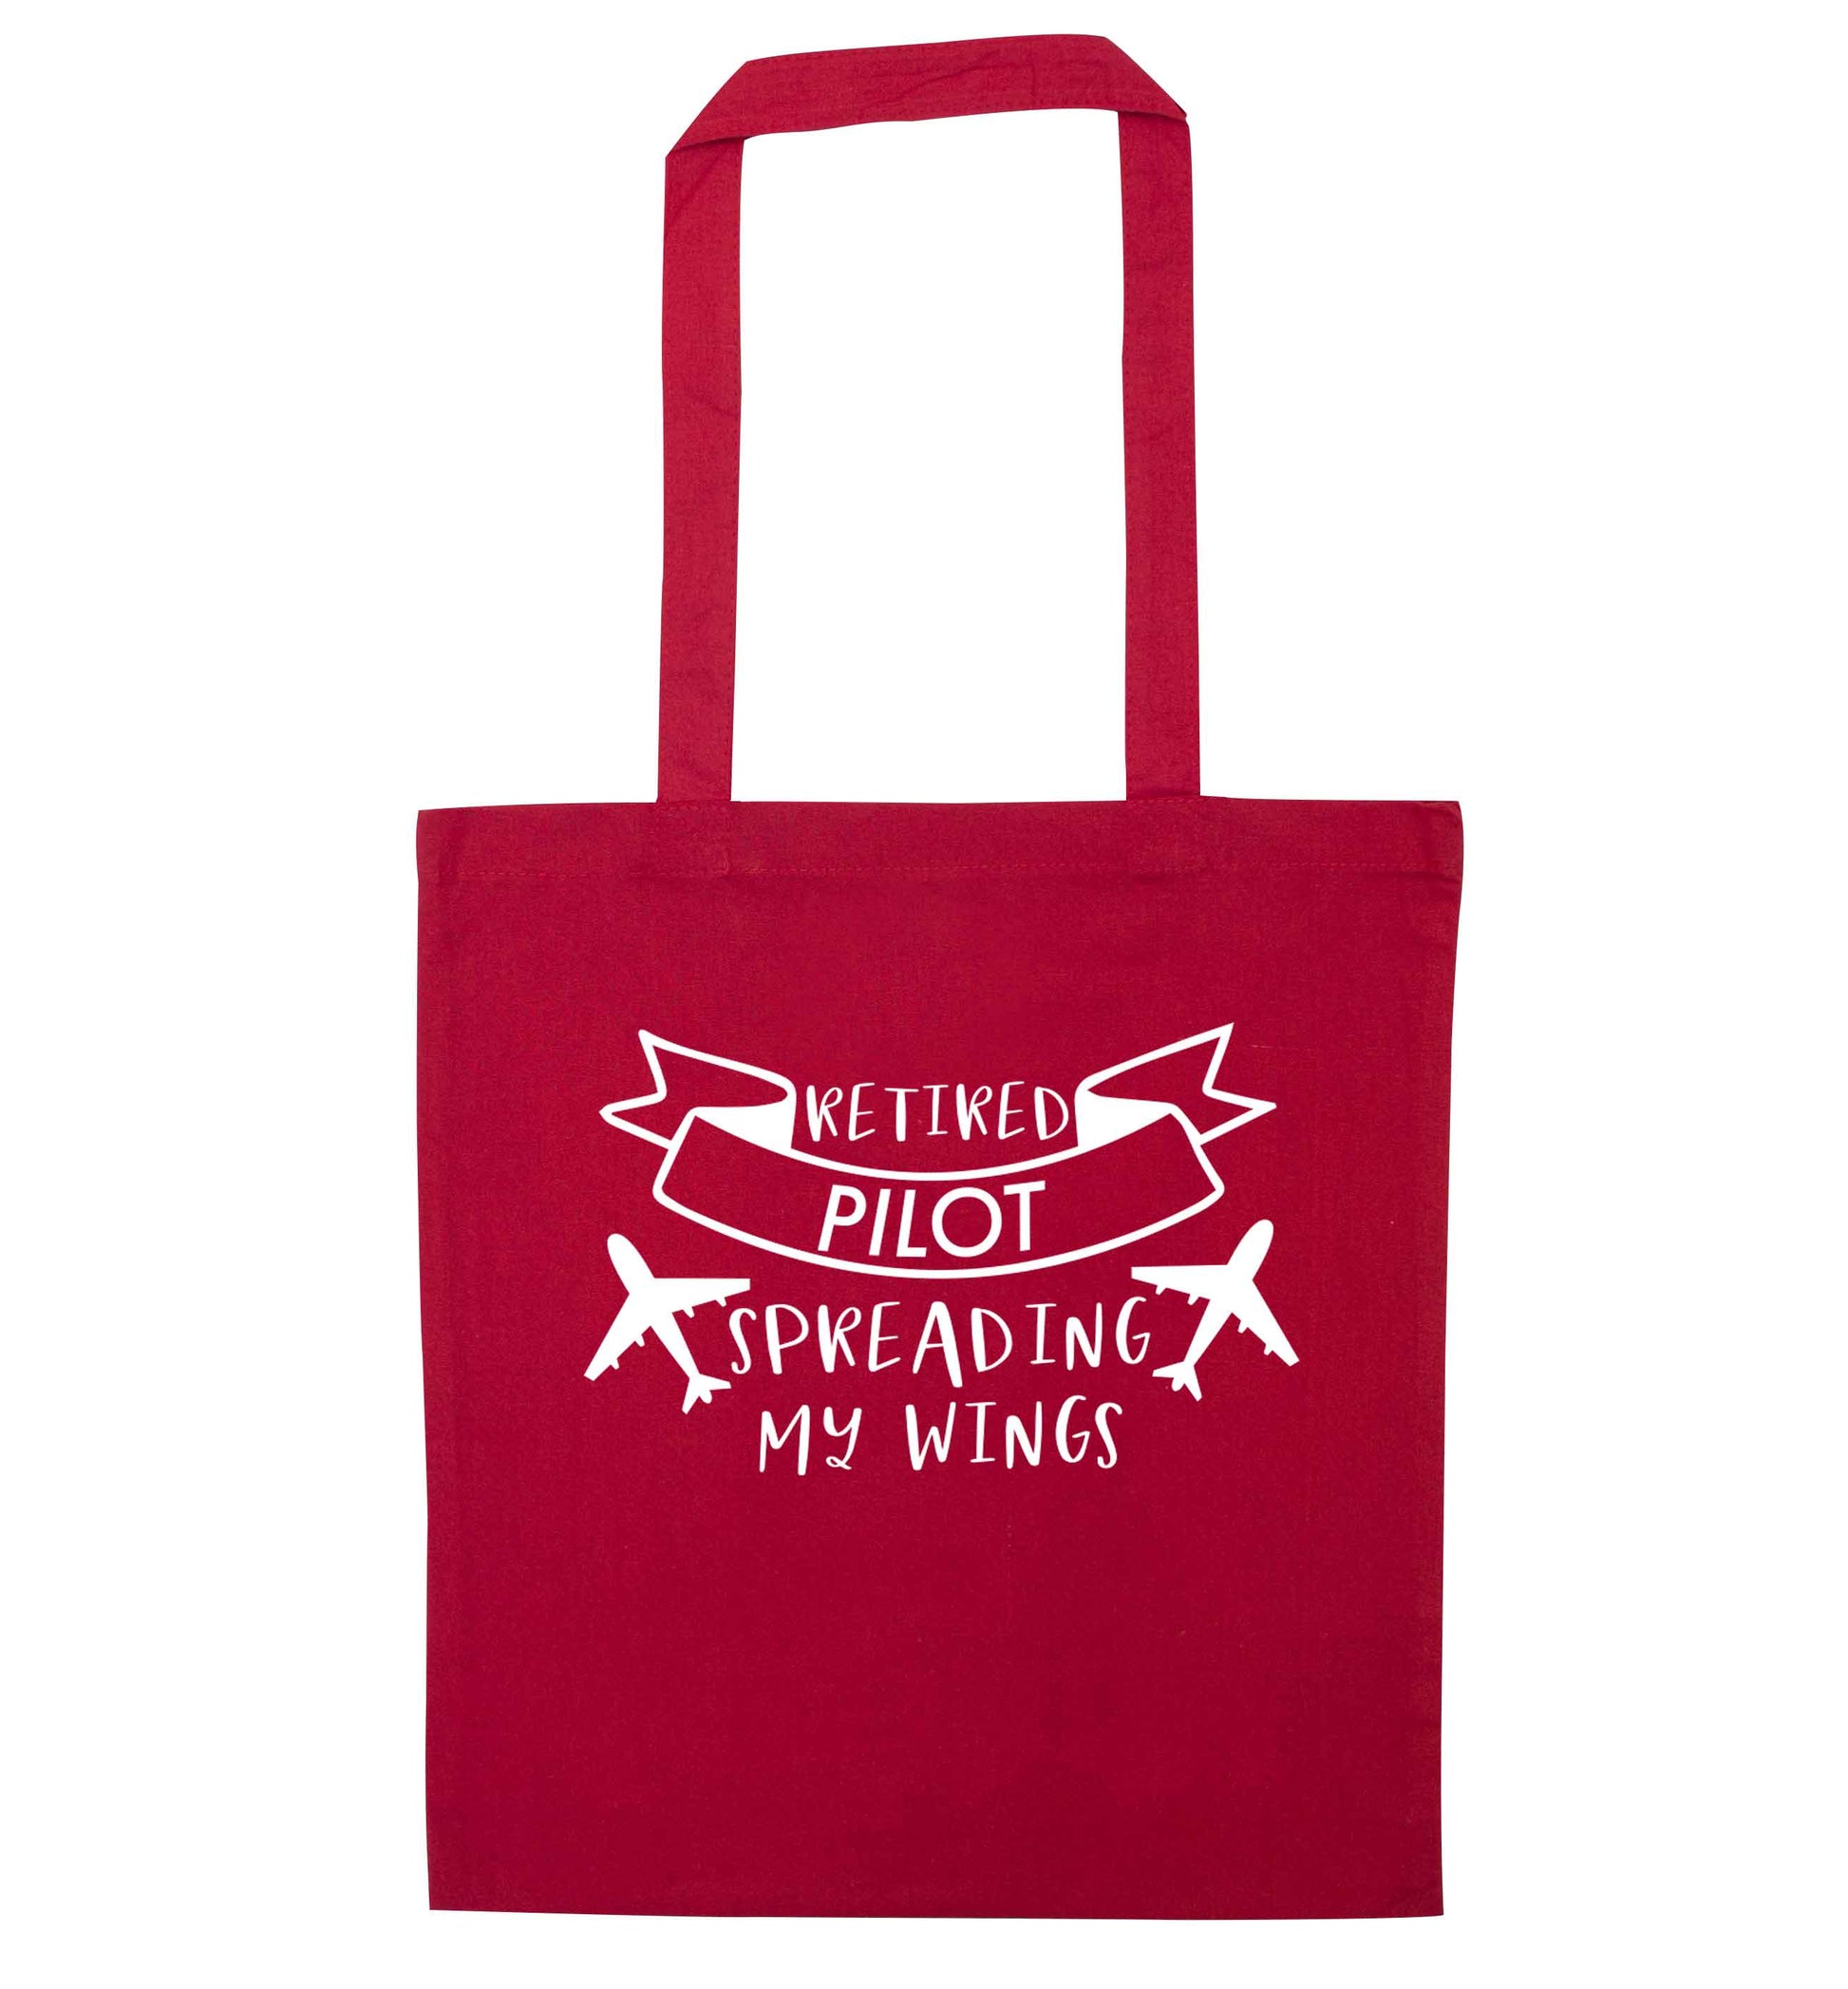 Retired pilot spreading my wings red tote bag